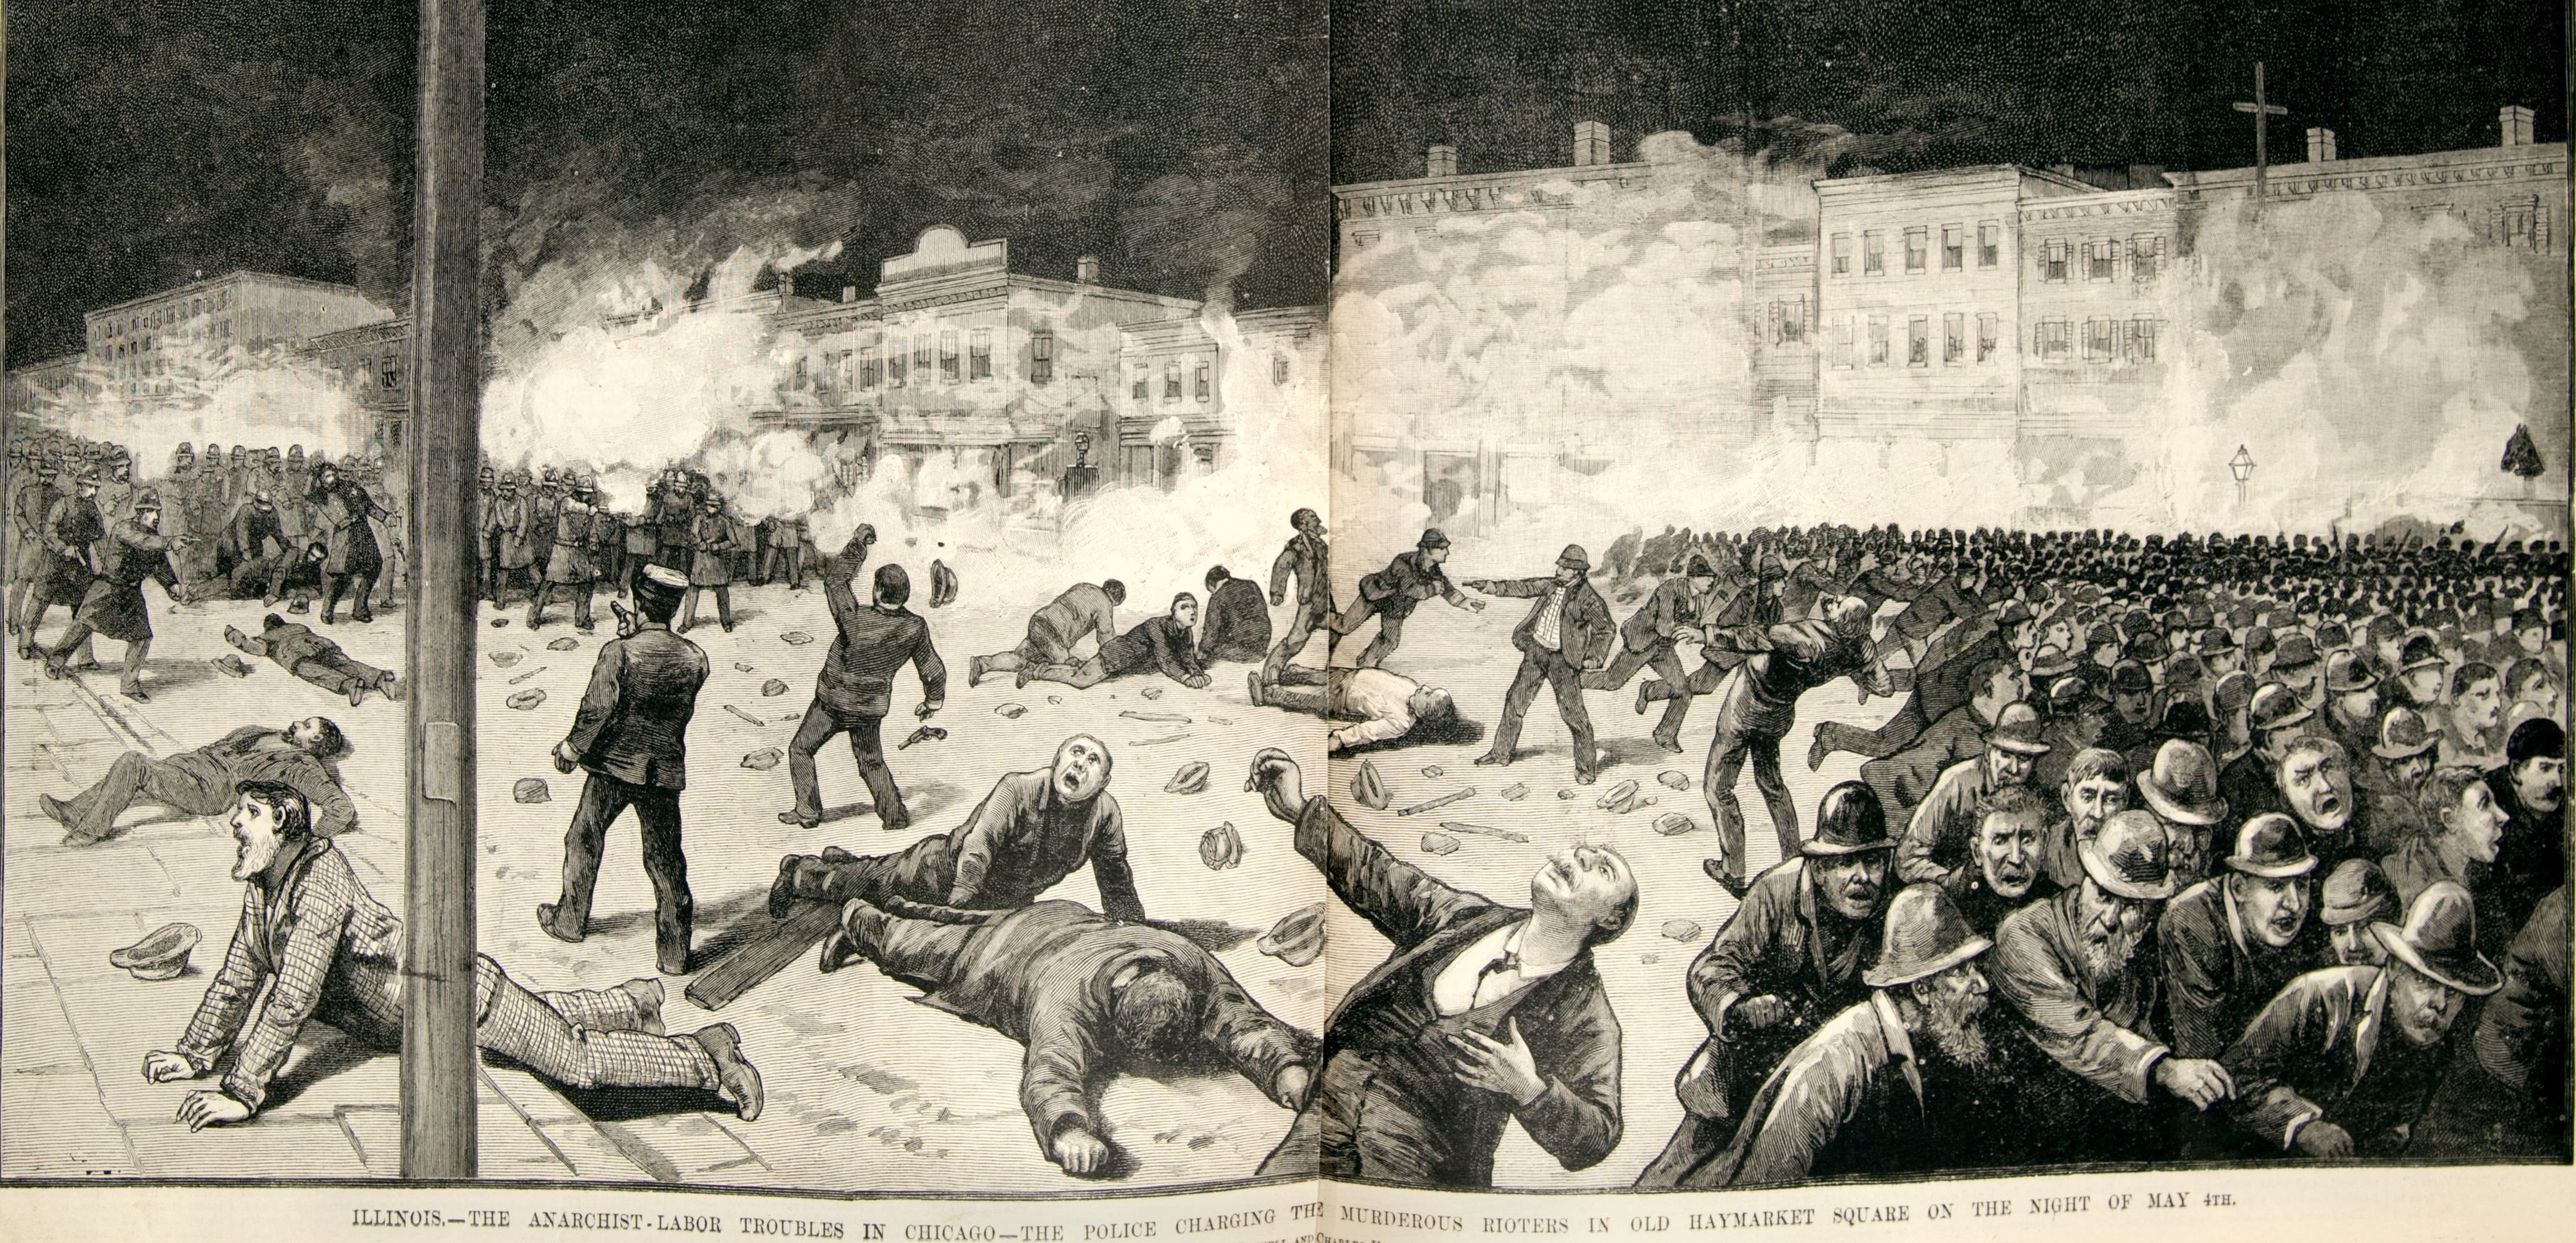 C. Bunnell, \"Police Charging the Murderous Rioters,\" <em>Frank Leslie's Illustrated Newspaper,</em> May 15, 1886.